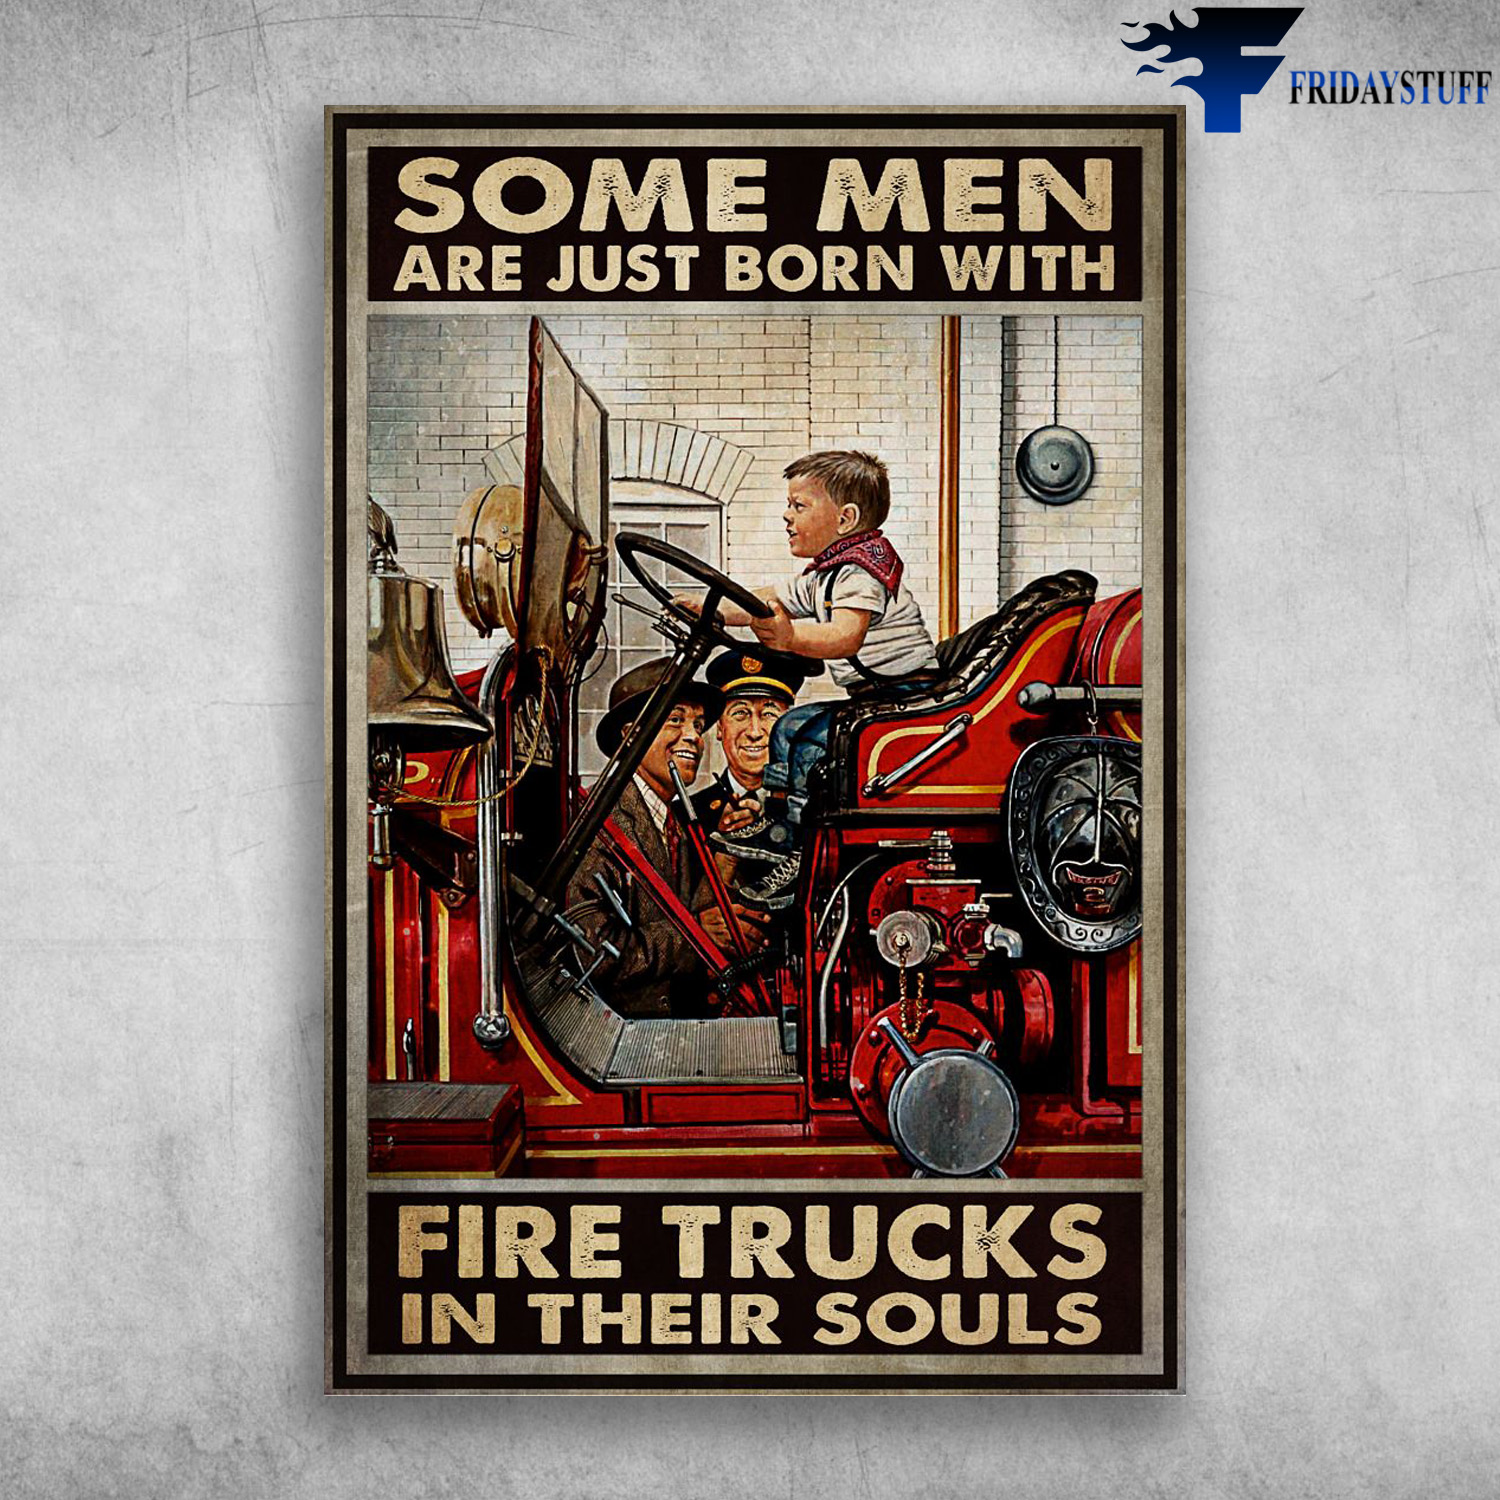 The Boy Driving Fire Truck - Some Men Are Just Born With Fire Trucks In Their Souls